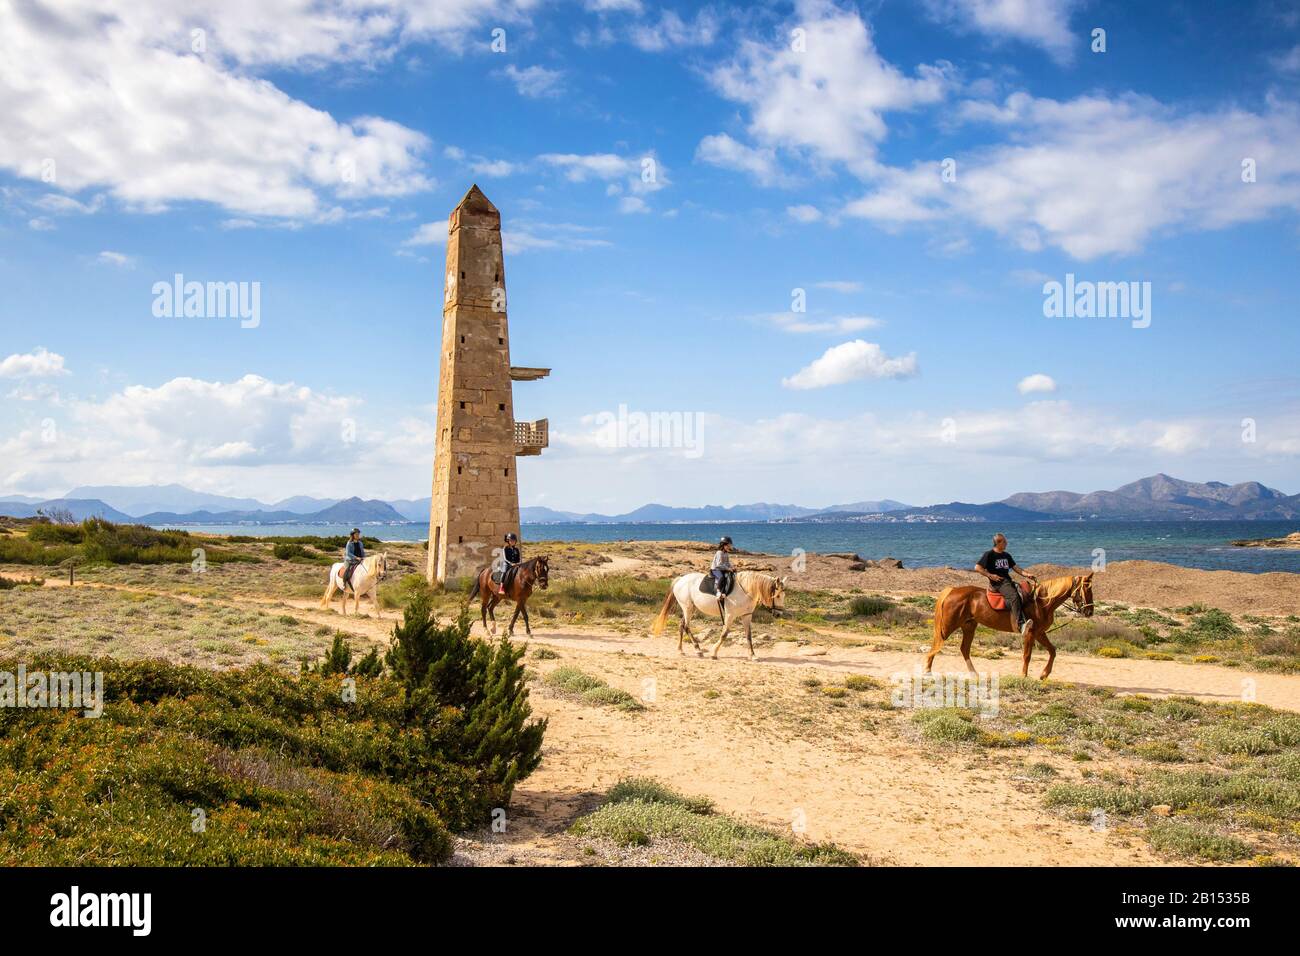 old watchtower by the sea and equestrian group, Balearic Islands, Majorca, Son Real, Can Picafort Stock Photo